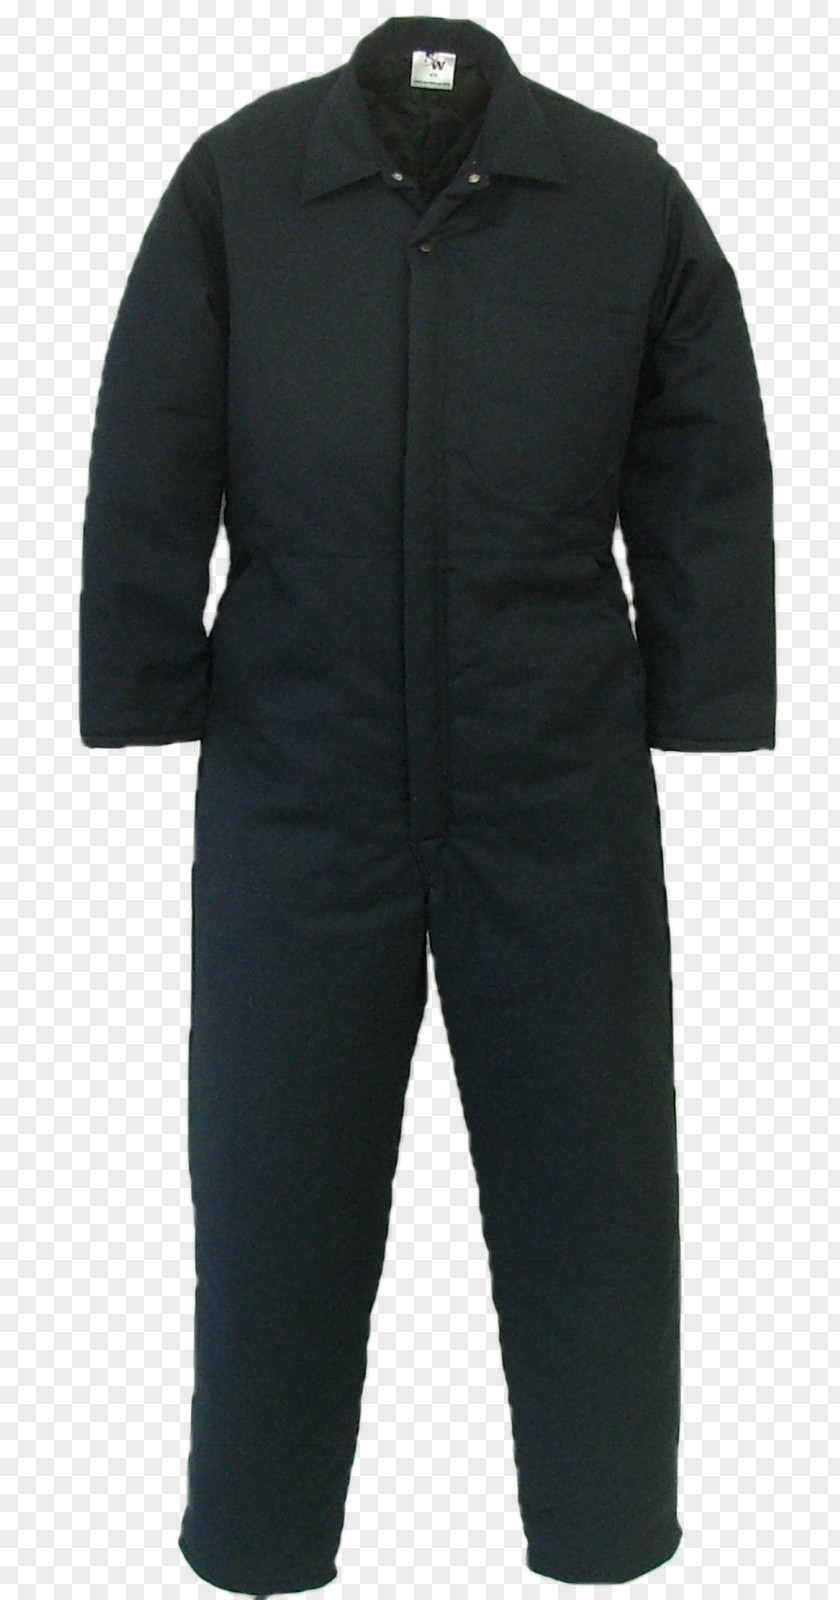 Jacket Sleeve Outerwear Overall PNG